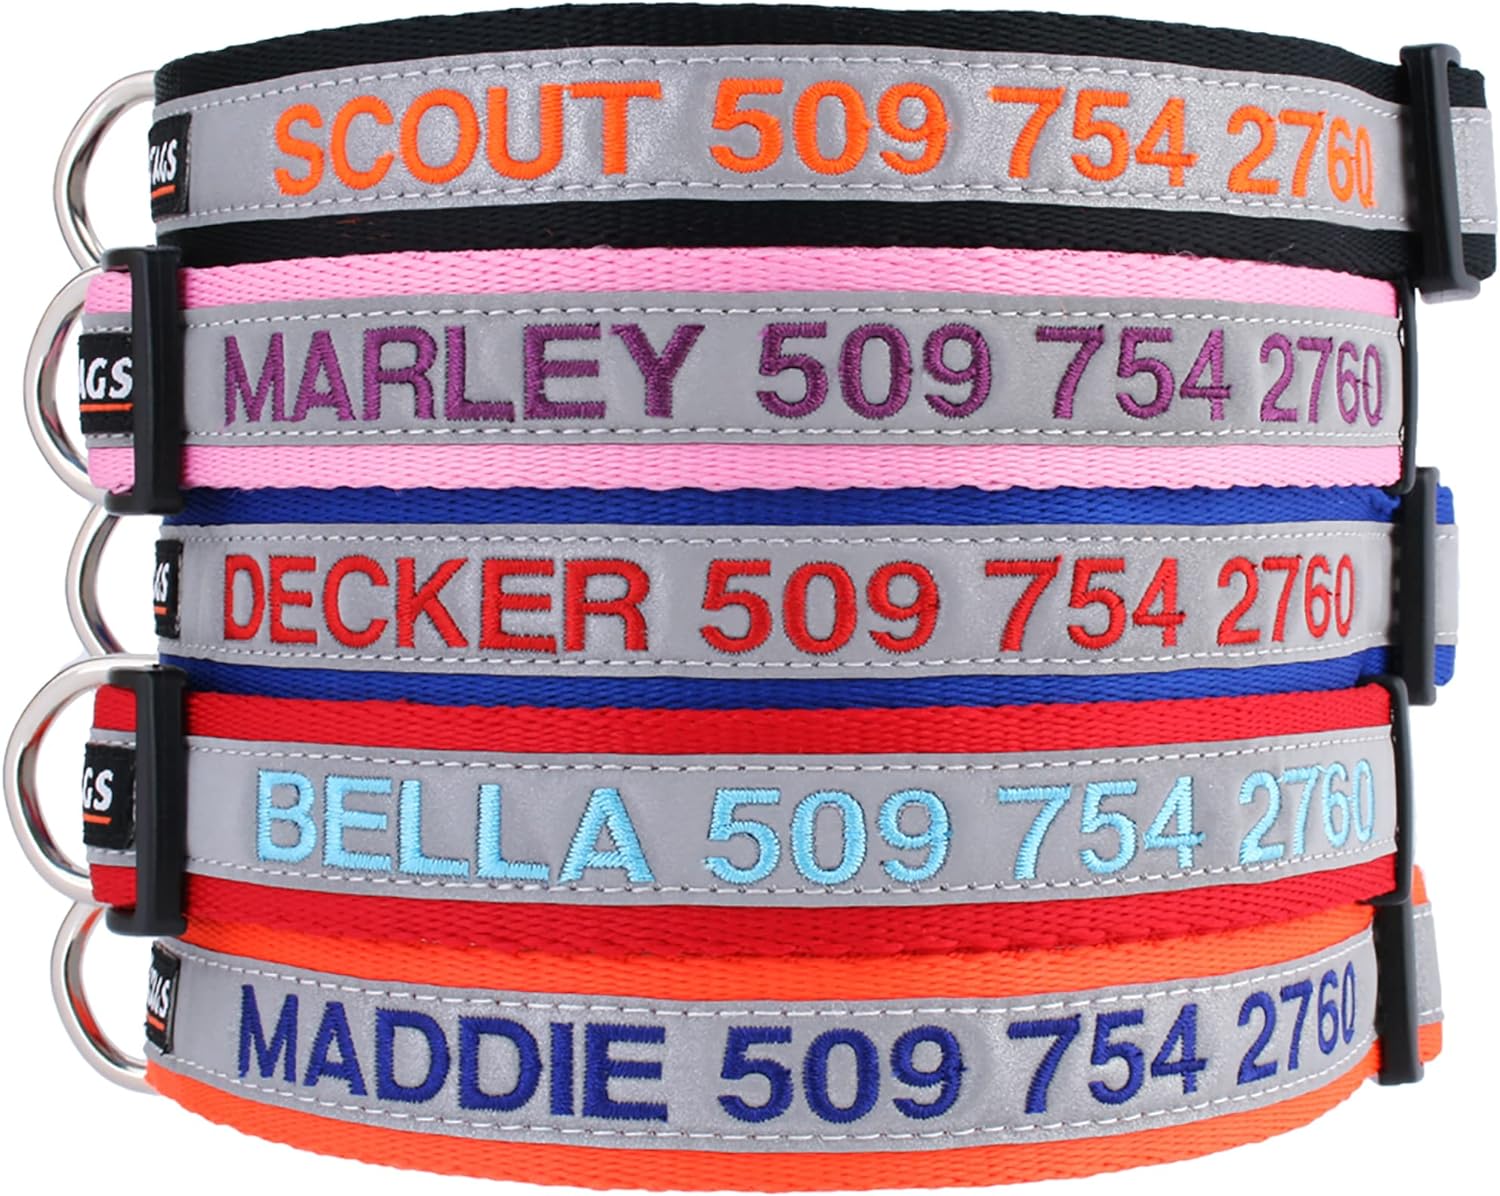 GoTags Reflective Personalized Dog Collar, Custom Embroidered with Pet Name and Phone Number in Red for Boy and Girl Dogs, 3 Adjustable Sizes, Small, Medium, and Large